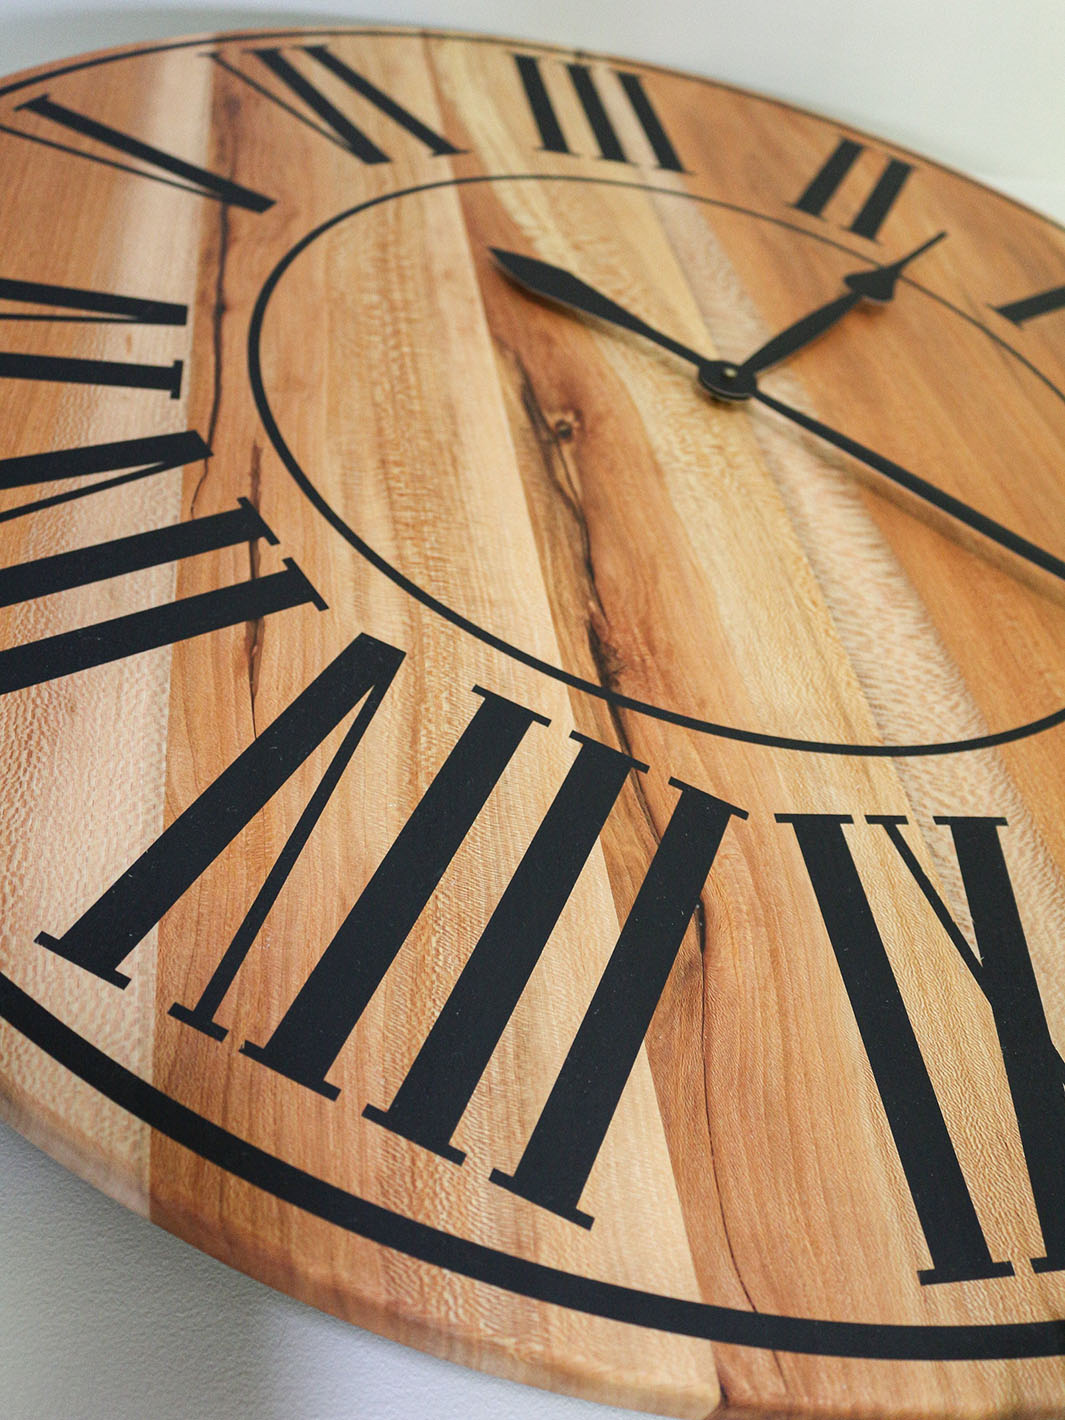 Large Quartersawn Sycamore Hardwood Wall Clock with Black Roman Numerals Earthly Comfort Clocks 610-3